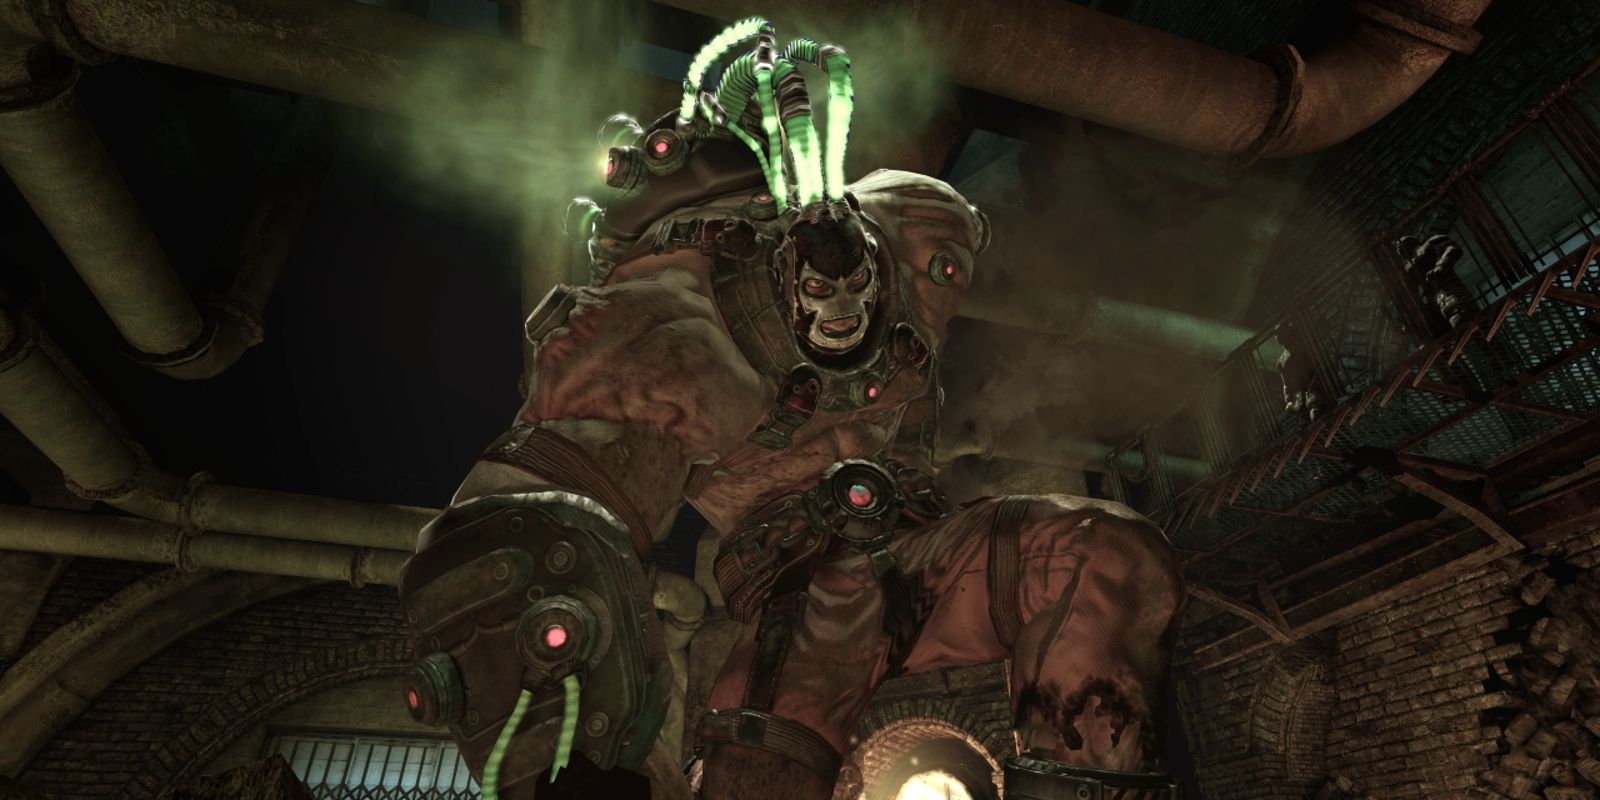 Bane boss fight in Batman: Arkham Asylum underground with pipes running across walls and ceiling